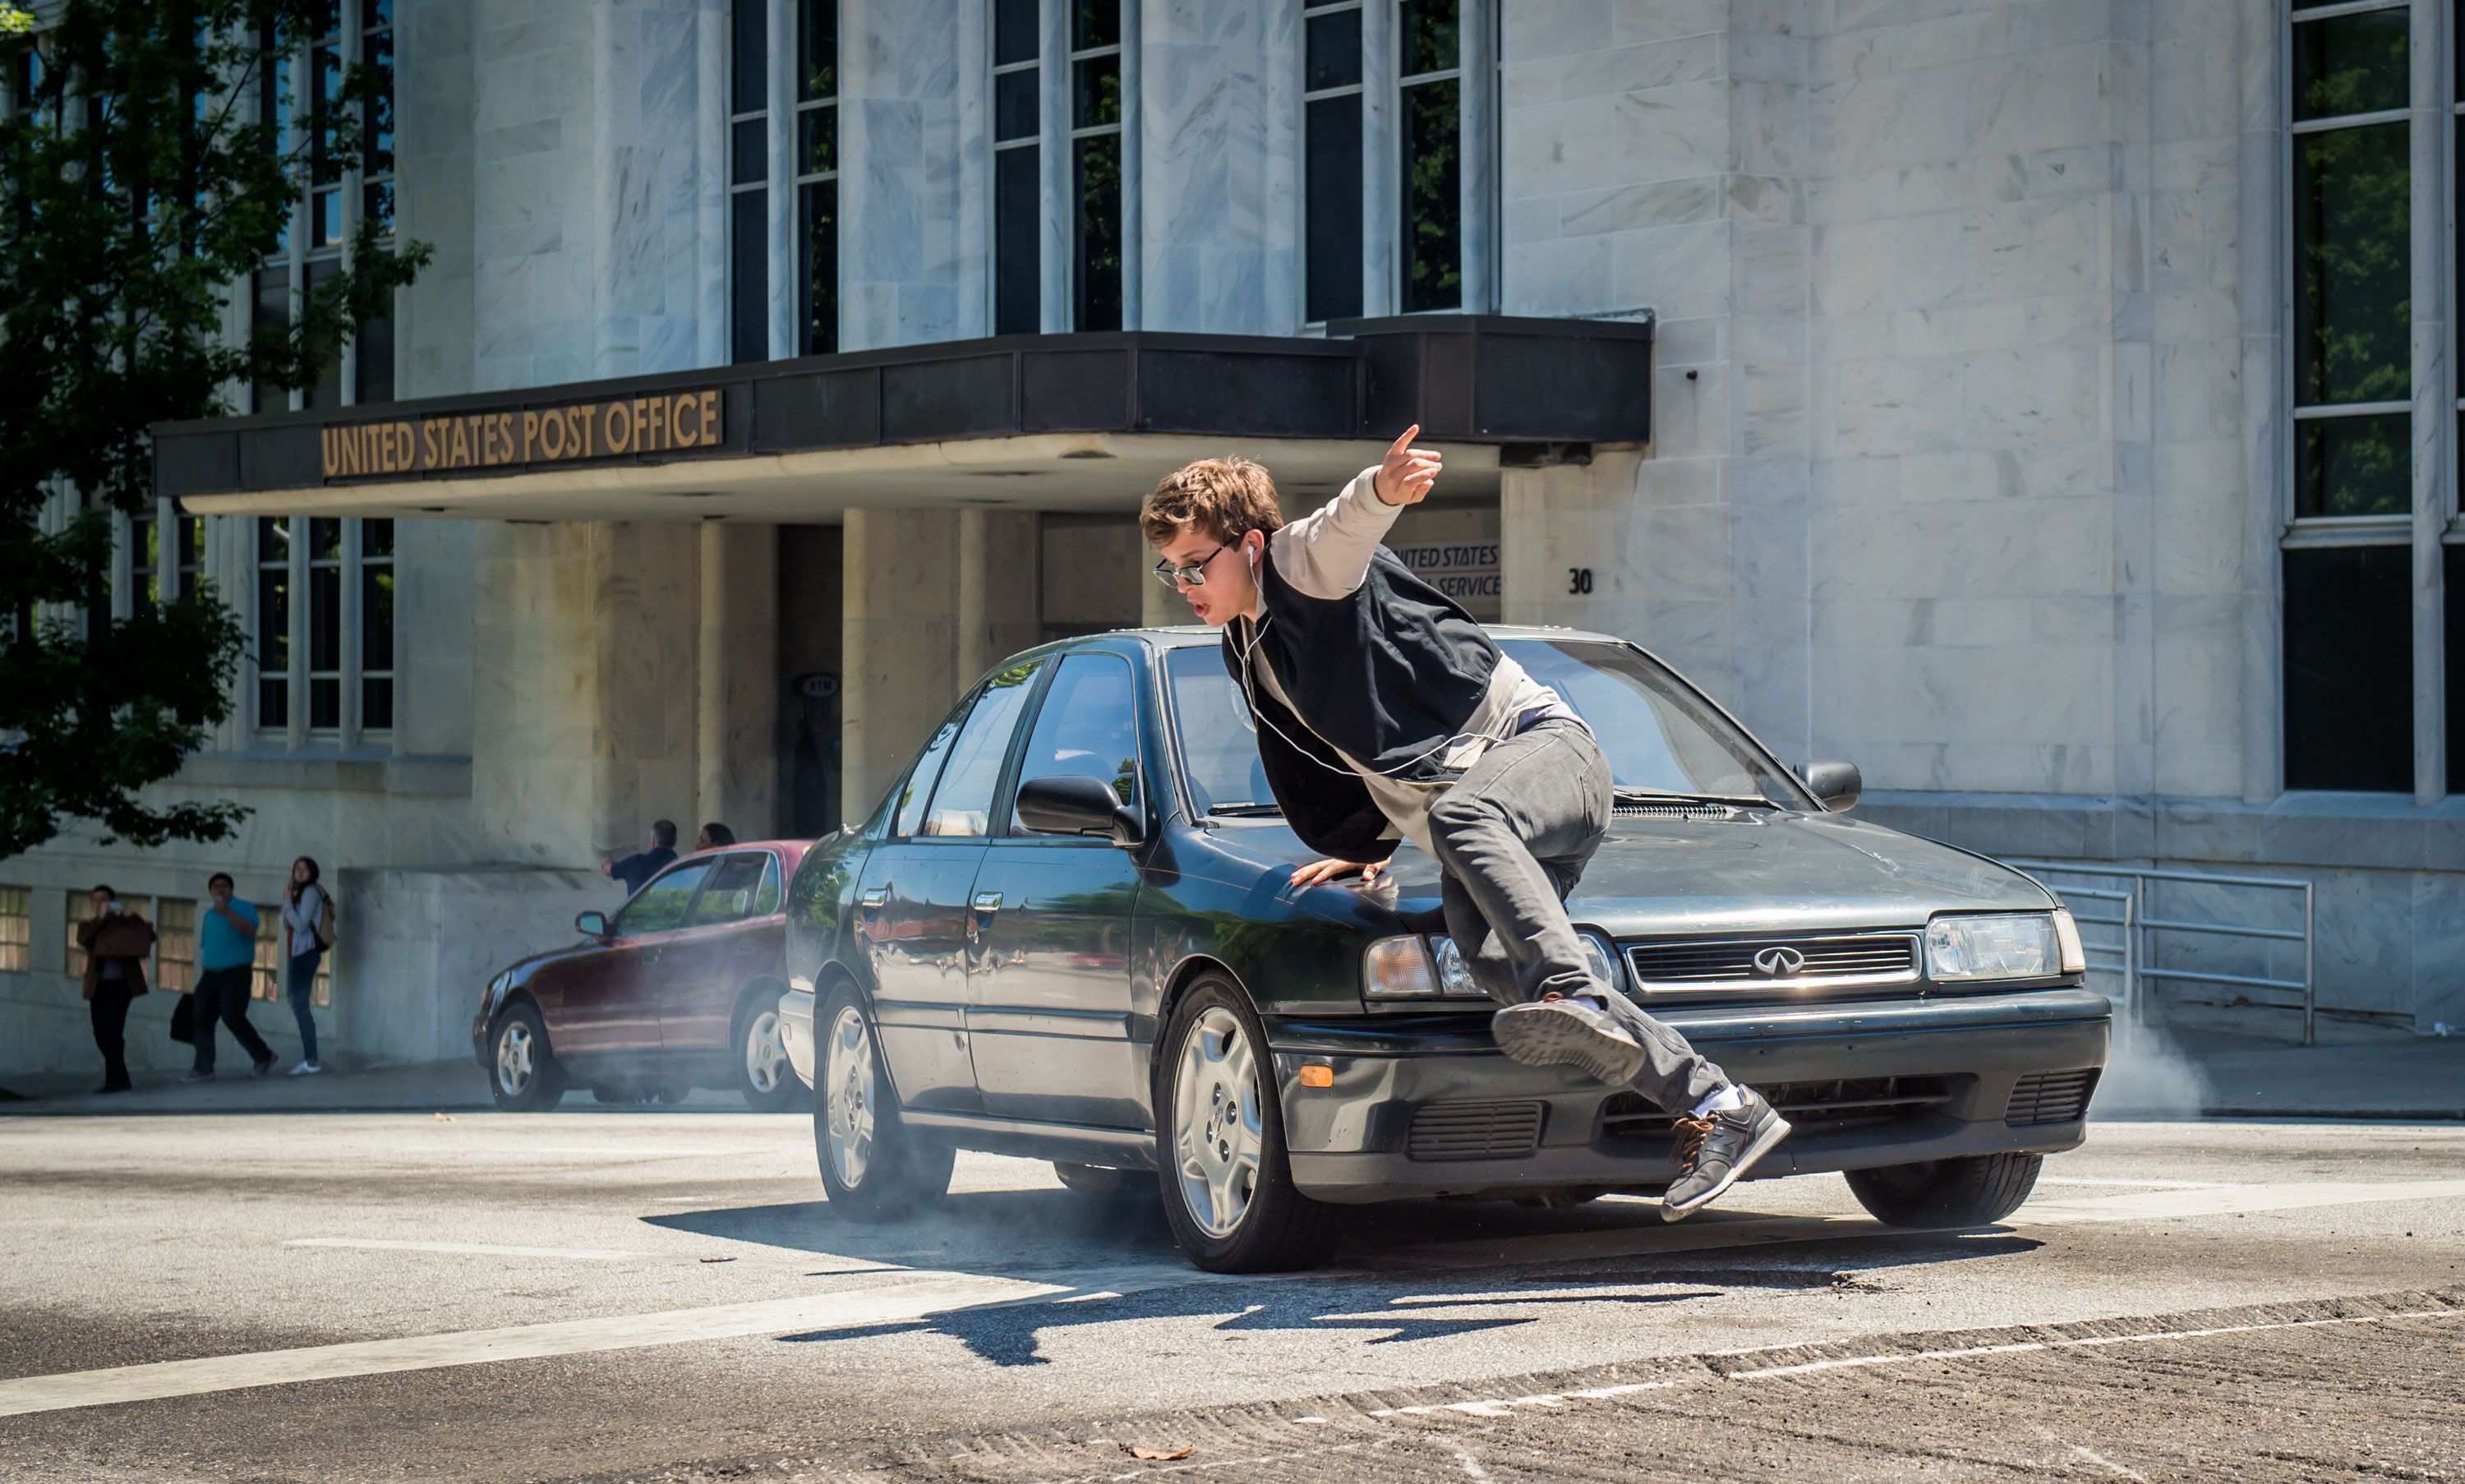 Baby Driver' Movie Review: A Cinematic Joyride